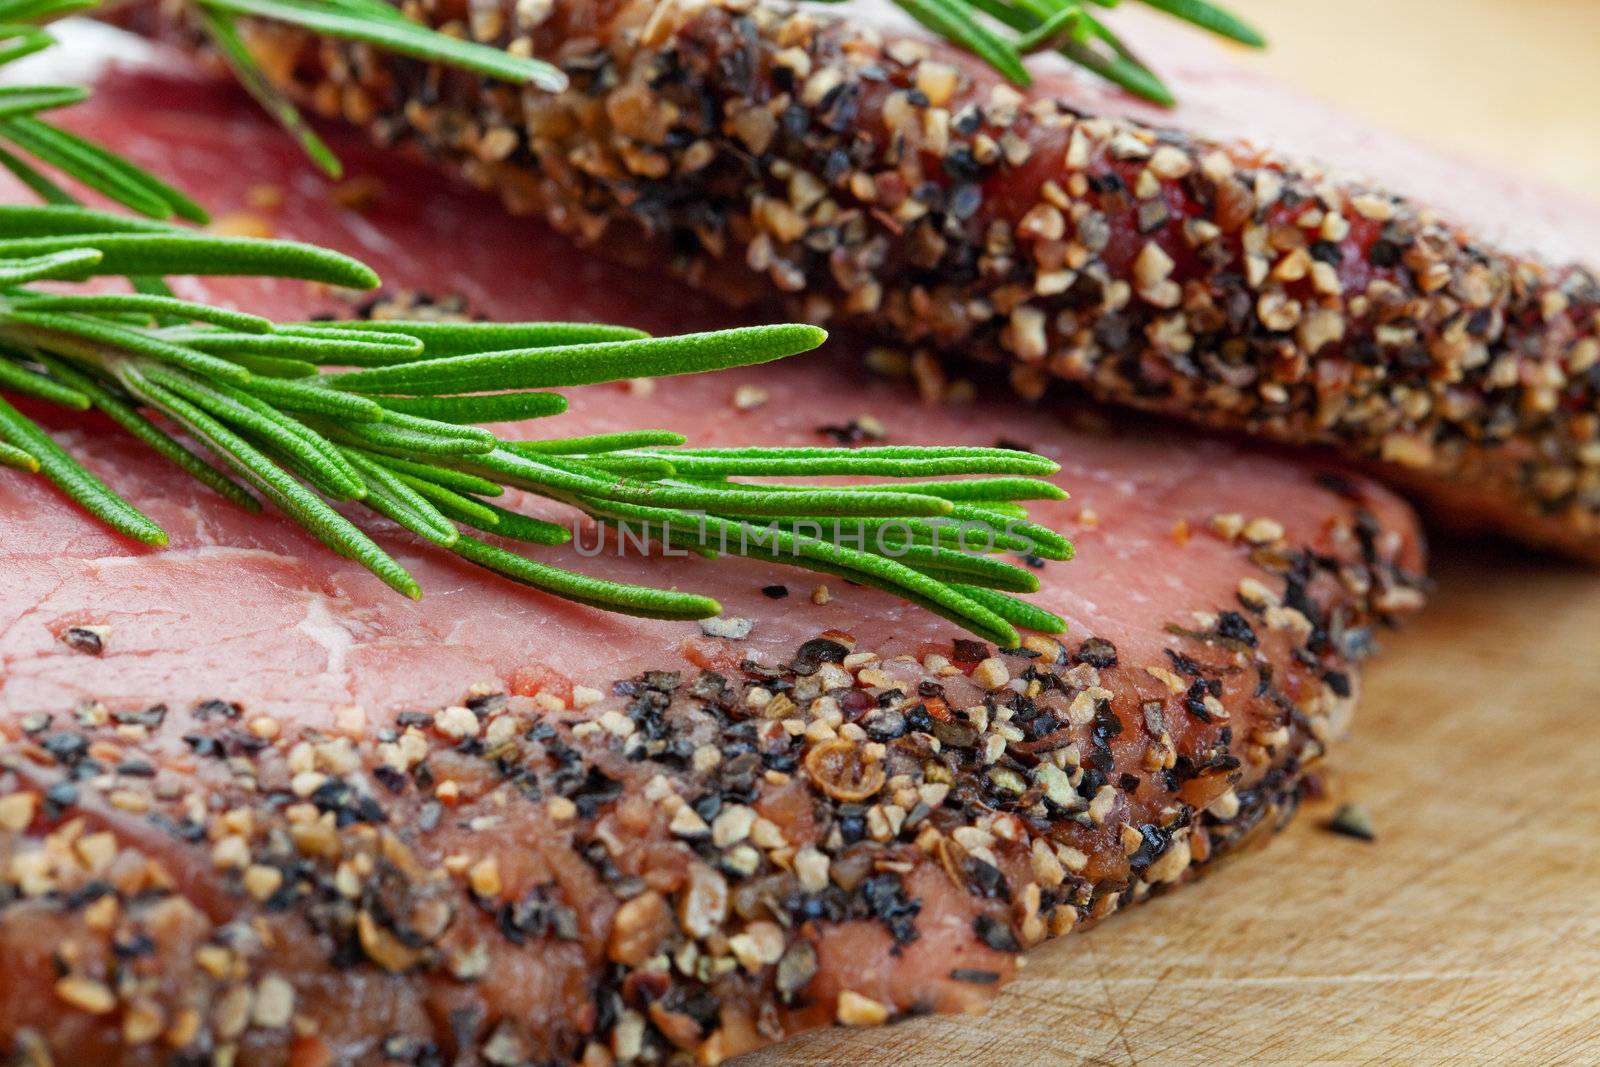 Two raw, eye of round, Alberta beef steaks, encrusted with pepper & spices and topped with fresh rosemary.  BBQ ready!  Shallow depth of field.